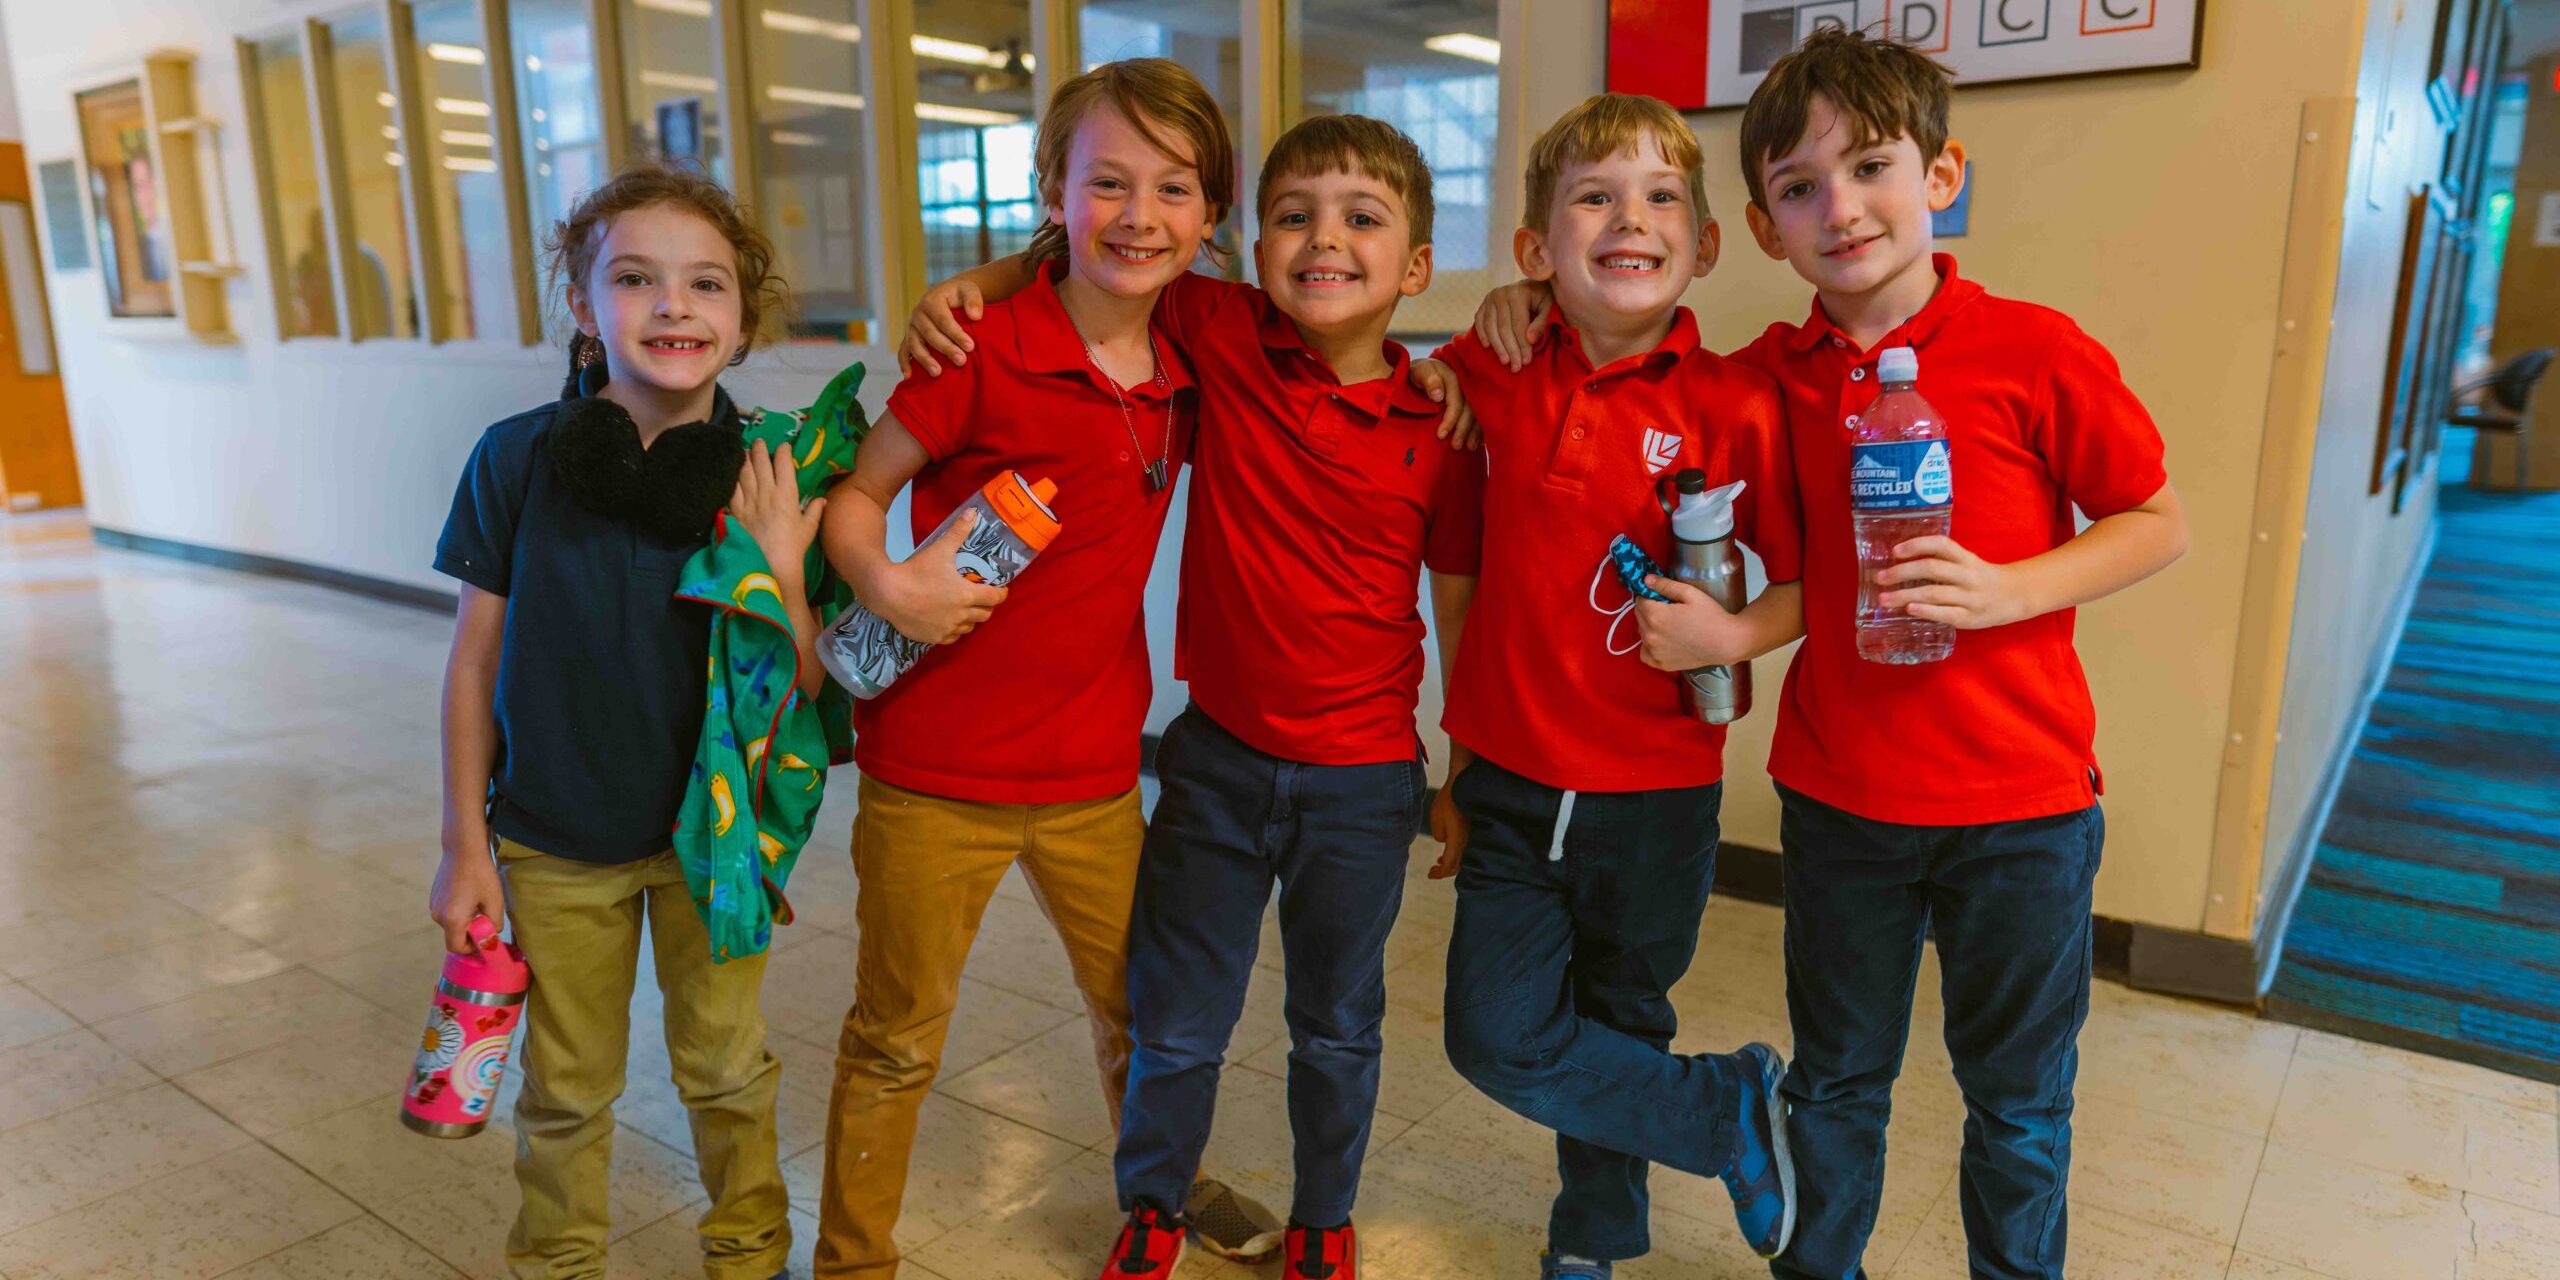 Lower School students smile in the hall